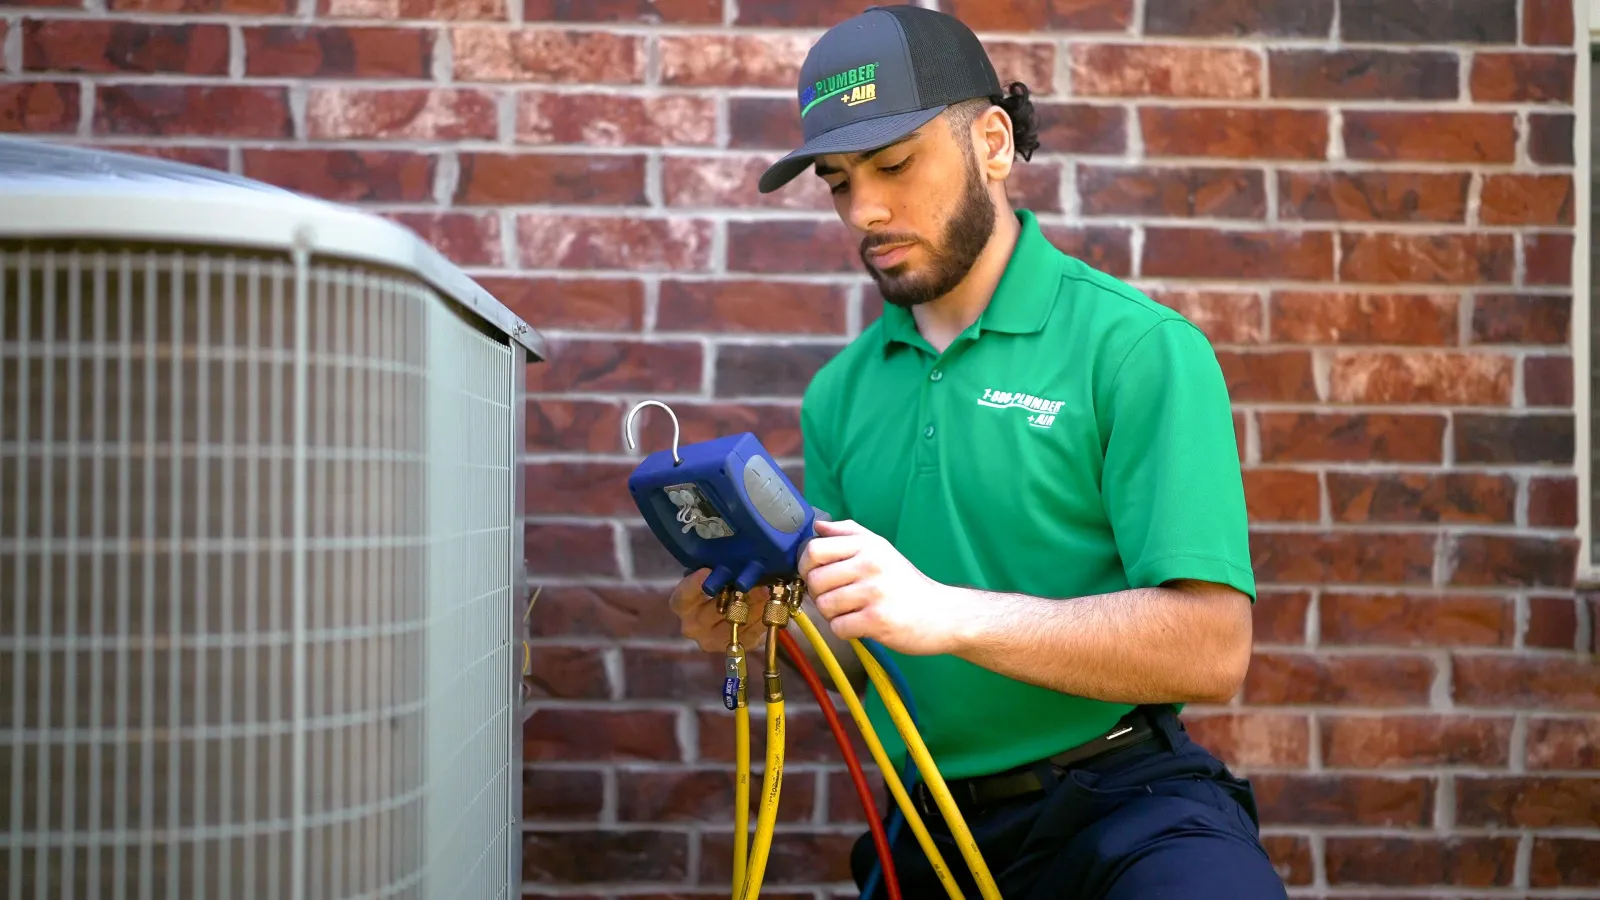 A 1-800-Plumber +Air of Greenville cooling technician repairs an outside ac unit